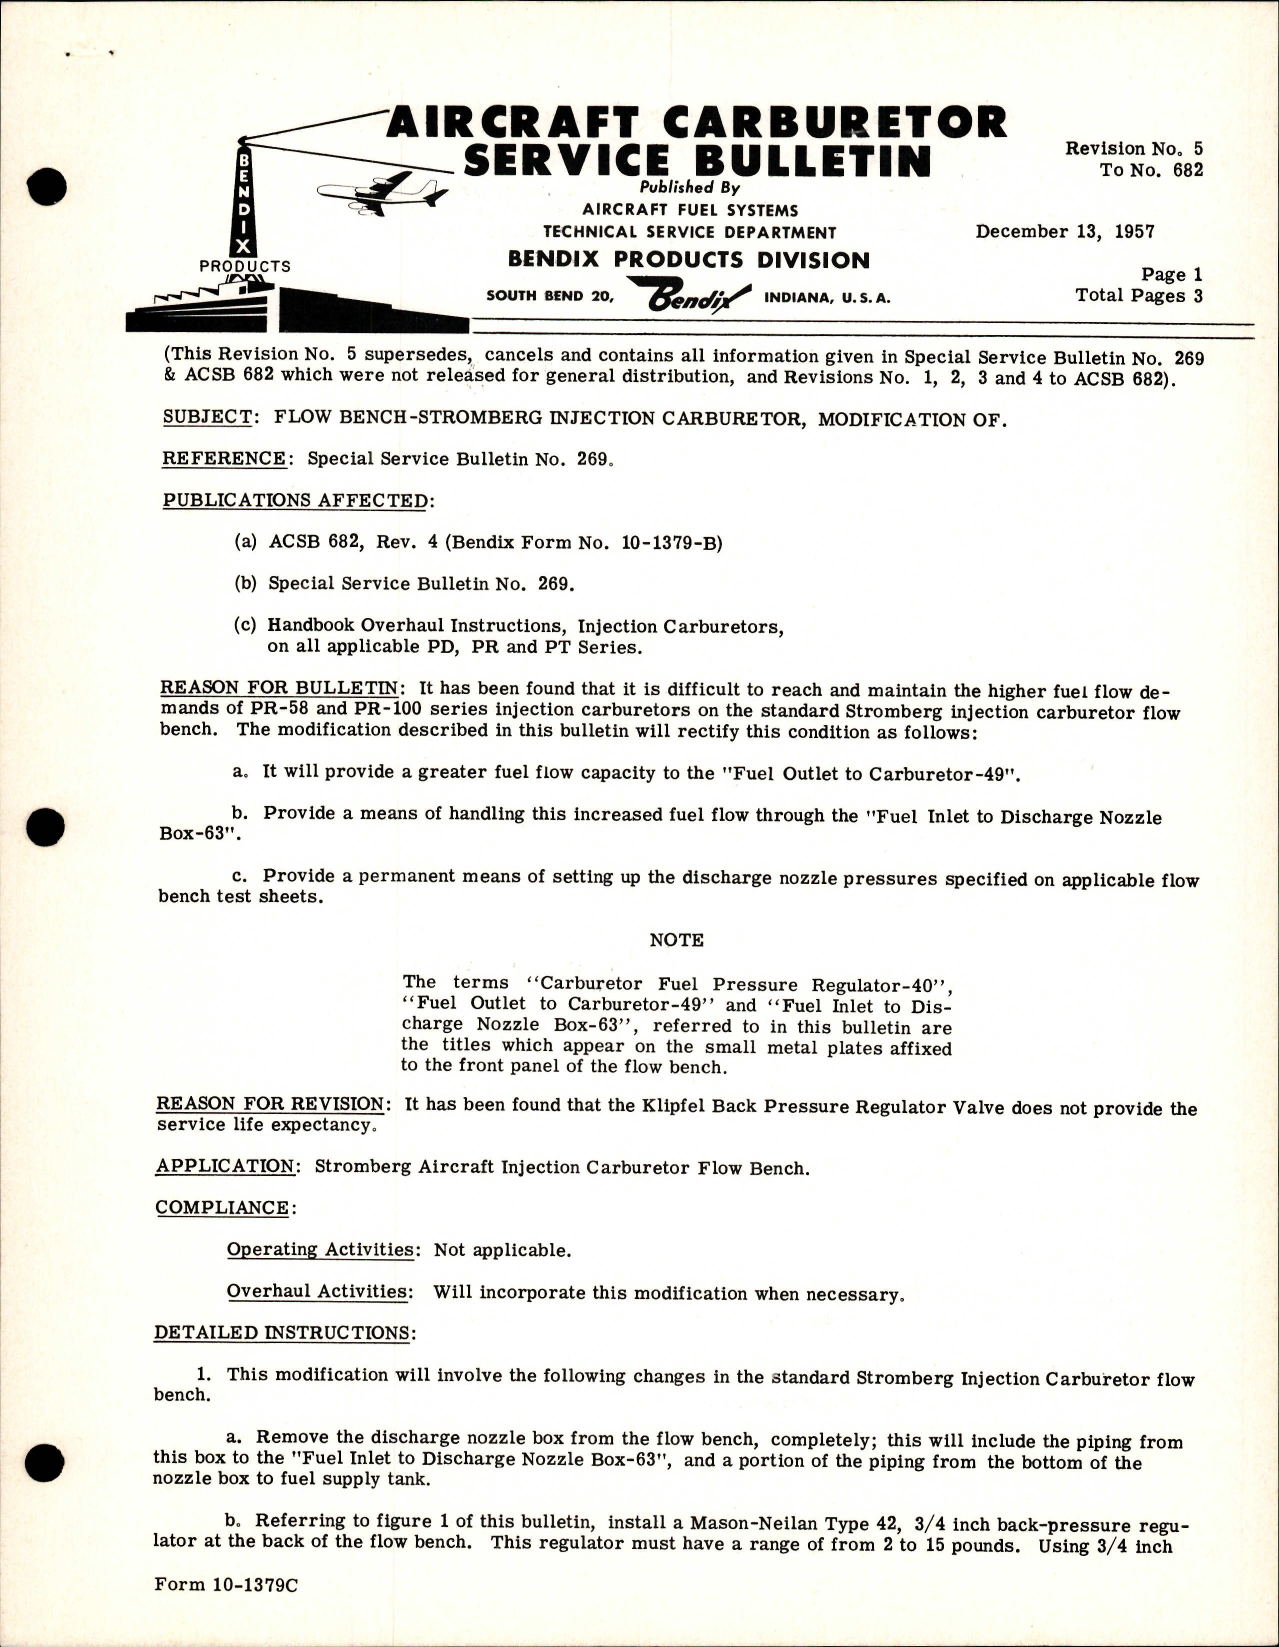 Sample page 1 from AirCorps Library document: Flow Bench Stromberg Injection Carburetor Modification